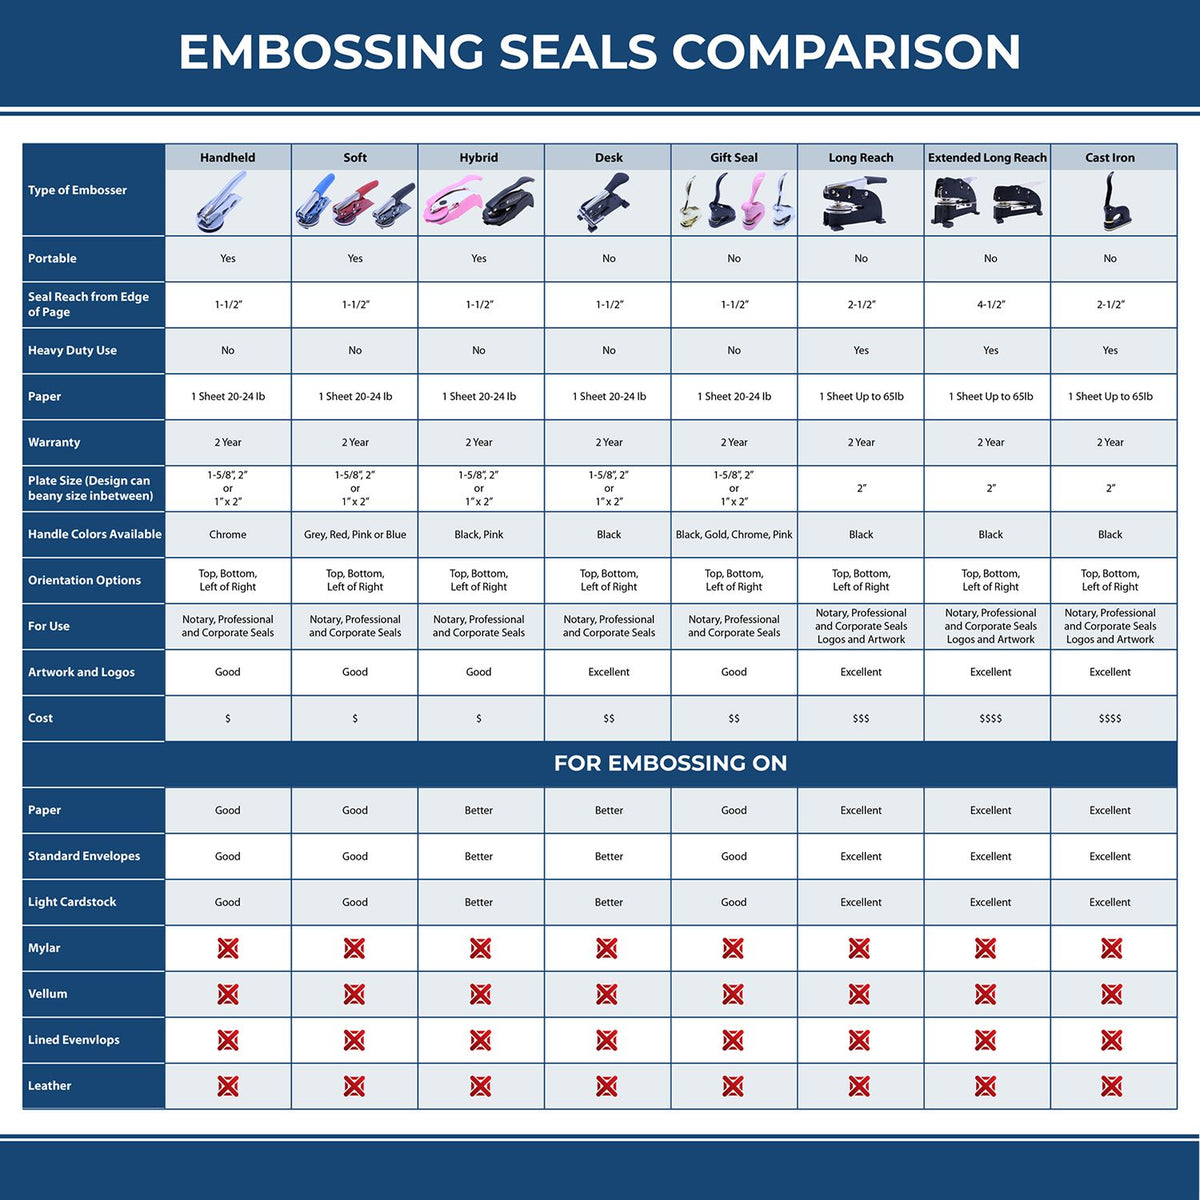 A comparison chart for the different types of mount models available for the Arkansas Engineer Desk Seal.